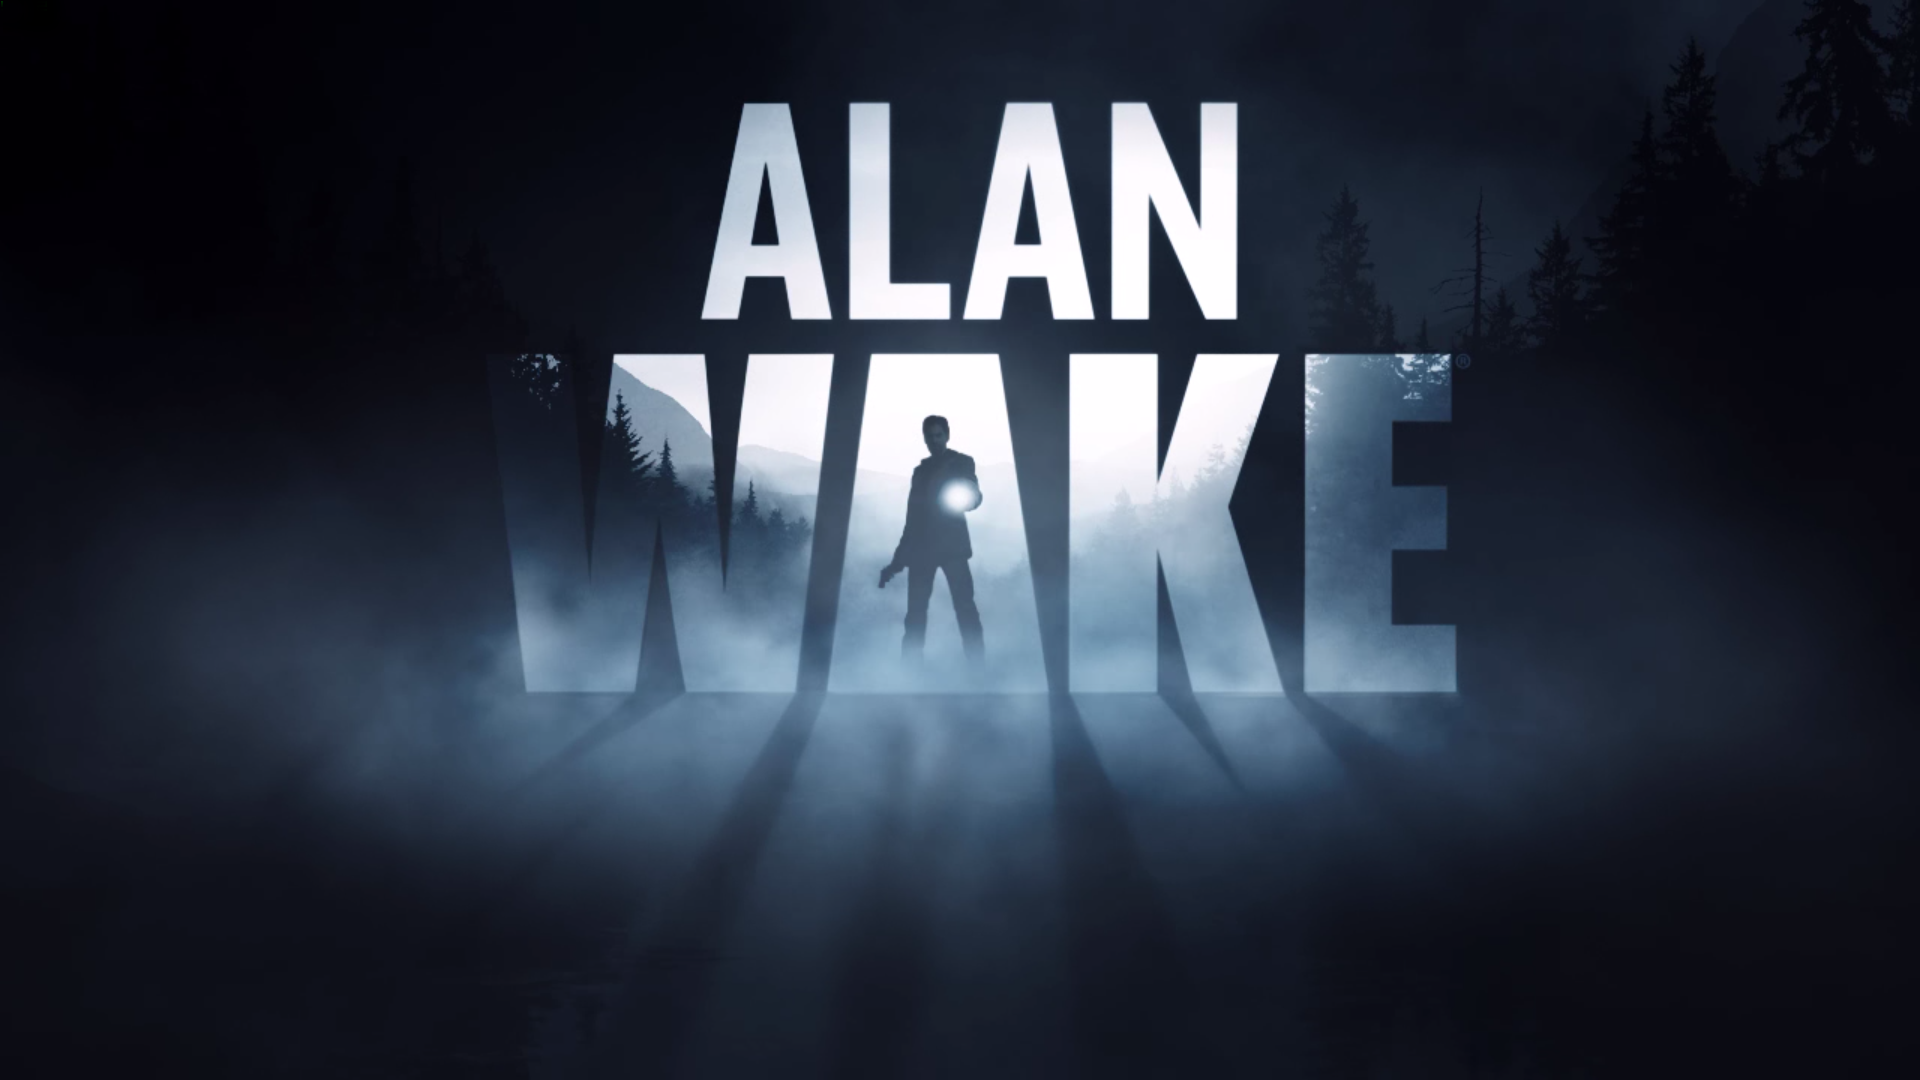 Alan Wake’s Return trademarked by Remedy Entertainment